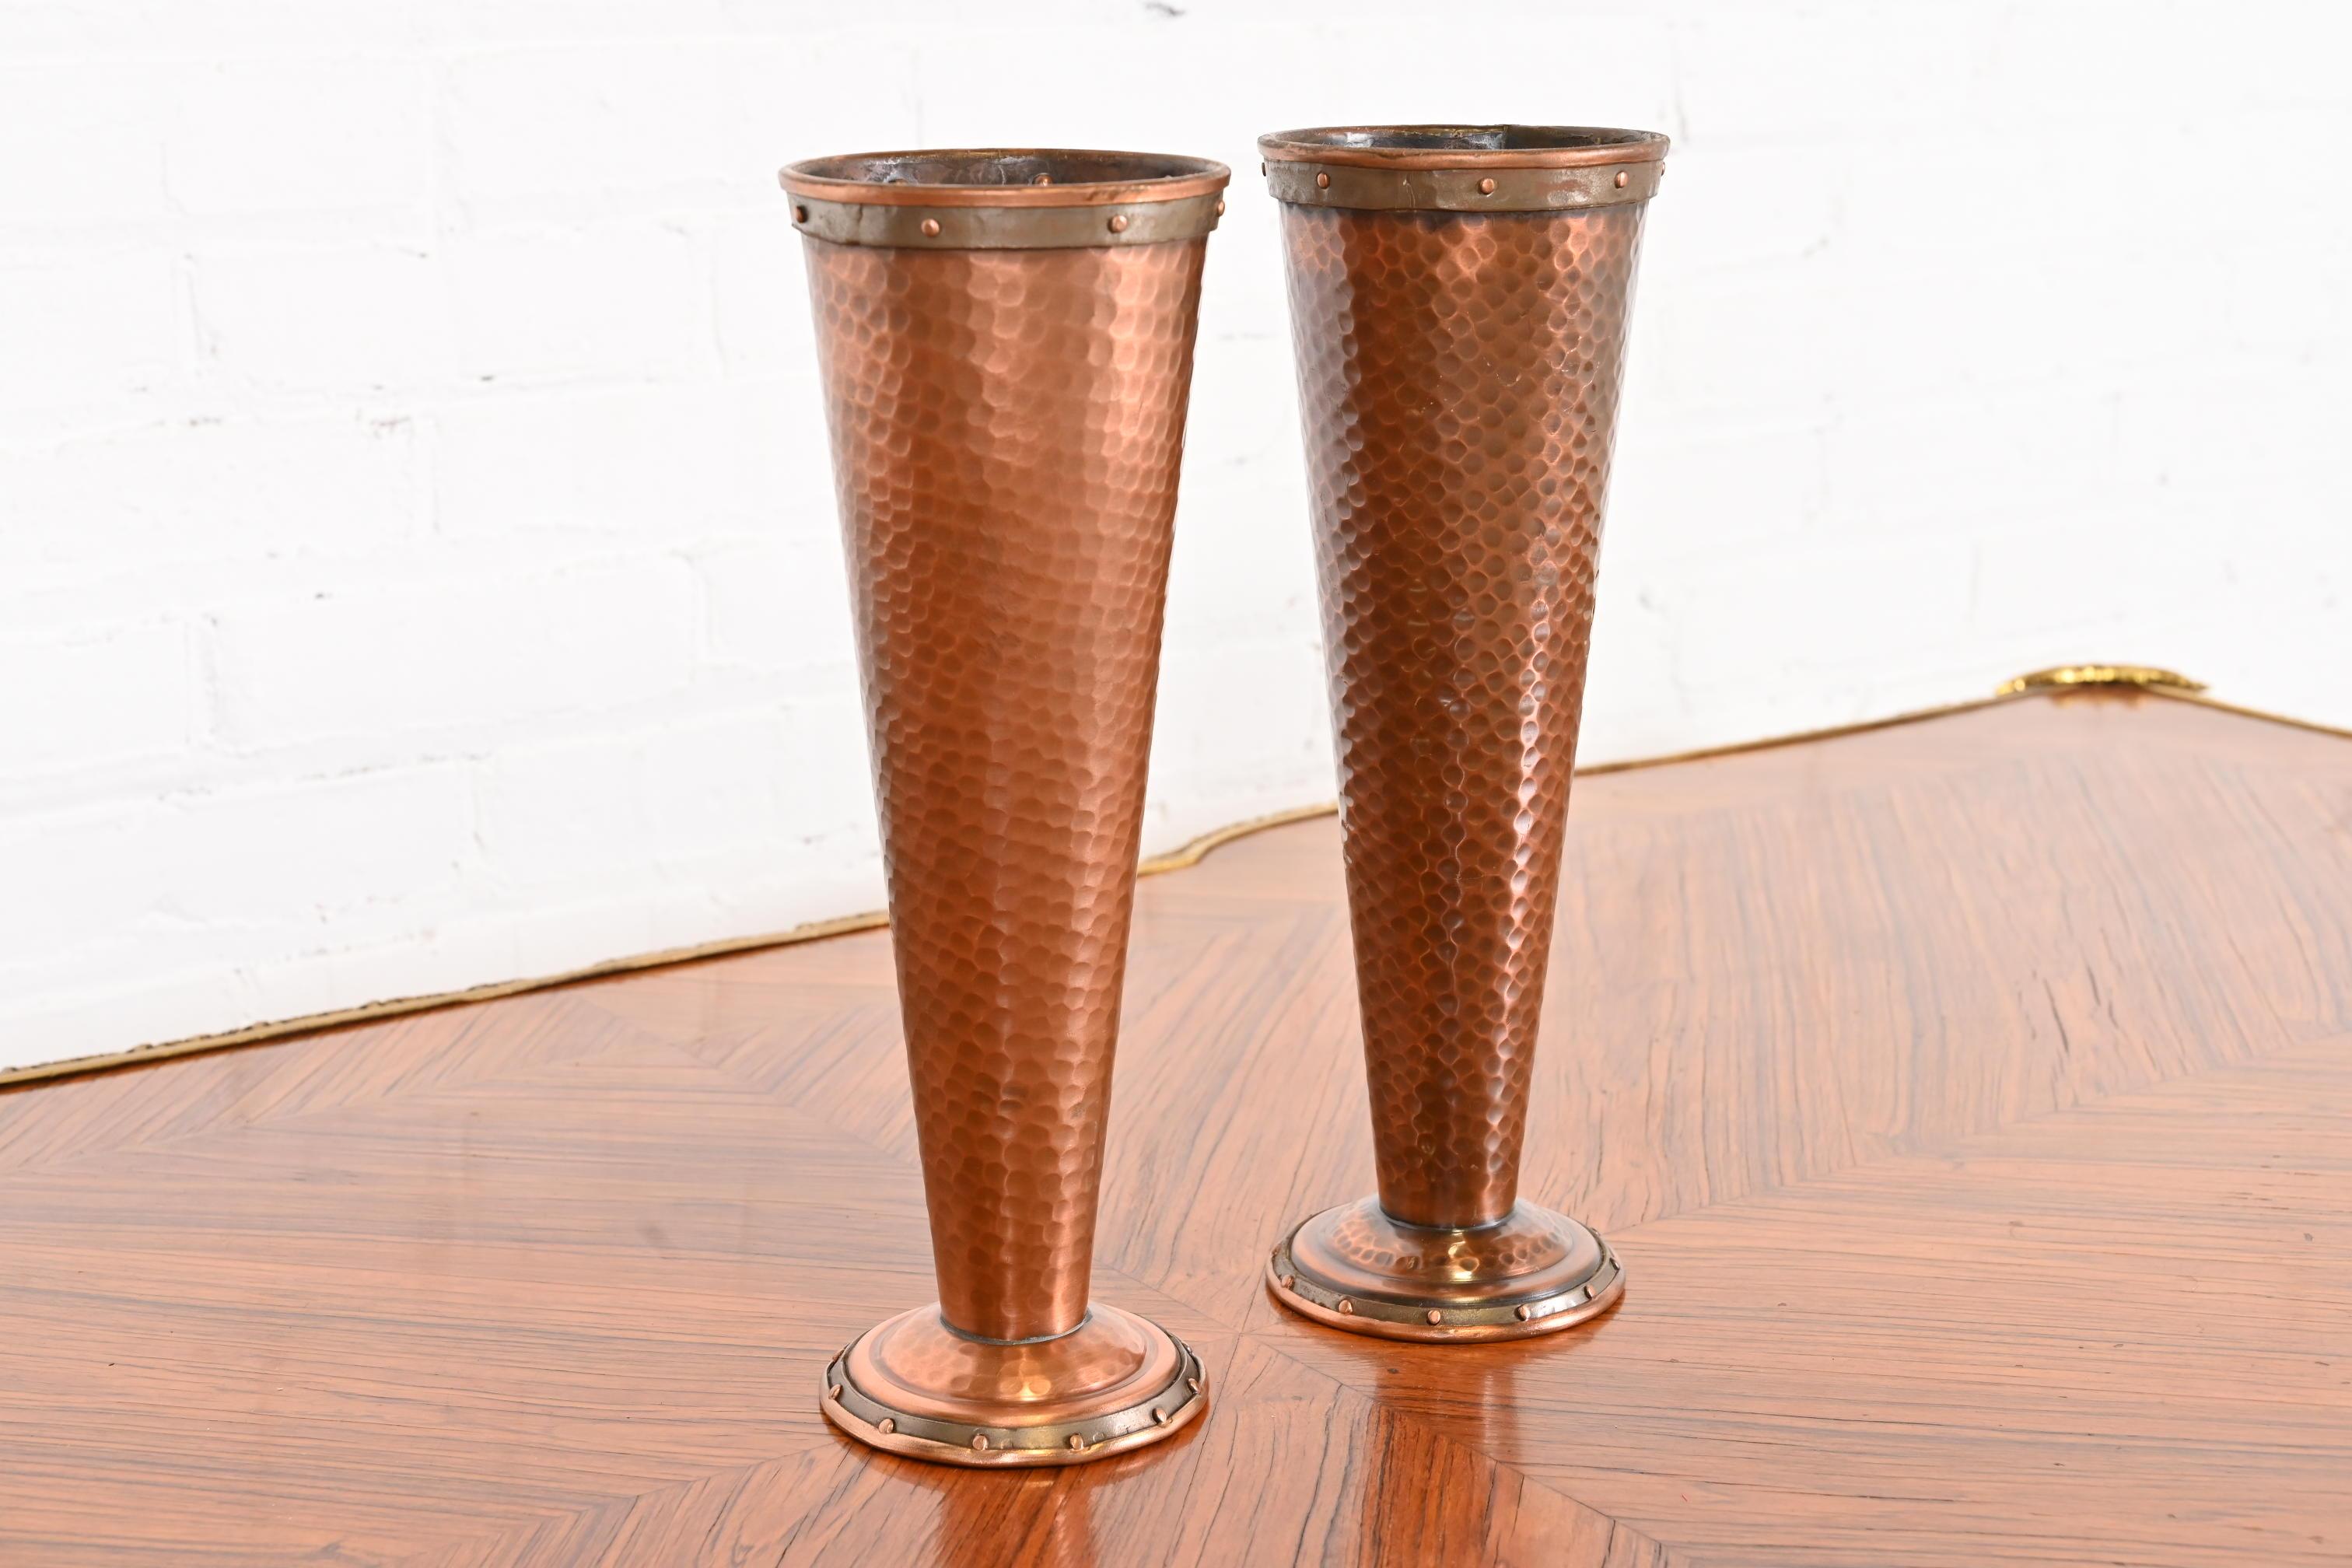 Joseph Heinrichs Style Arts and Crafts Hand-Hammered Copper Vases, Pair For Sale 2